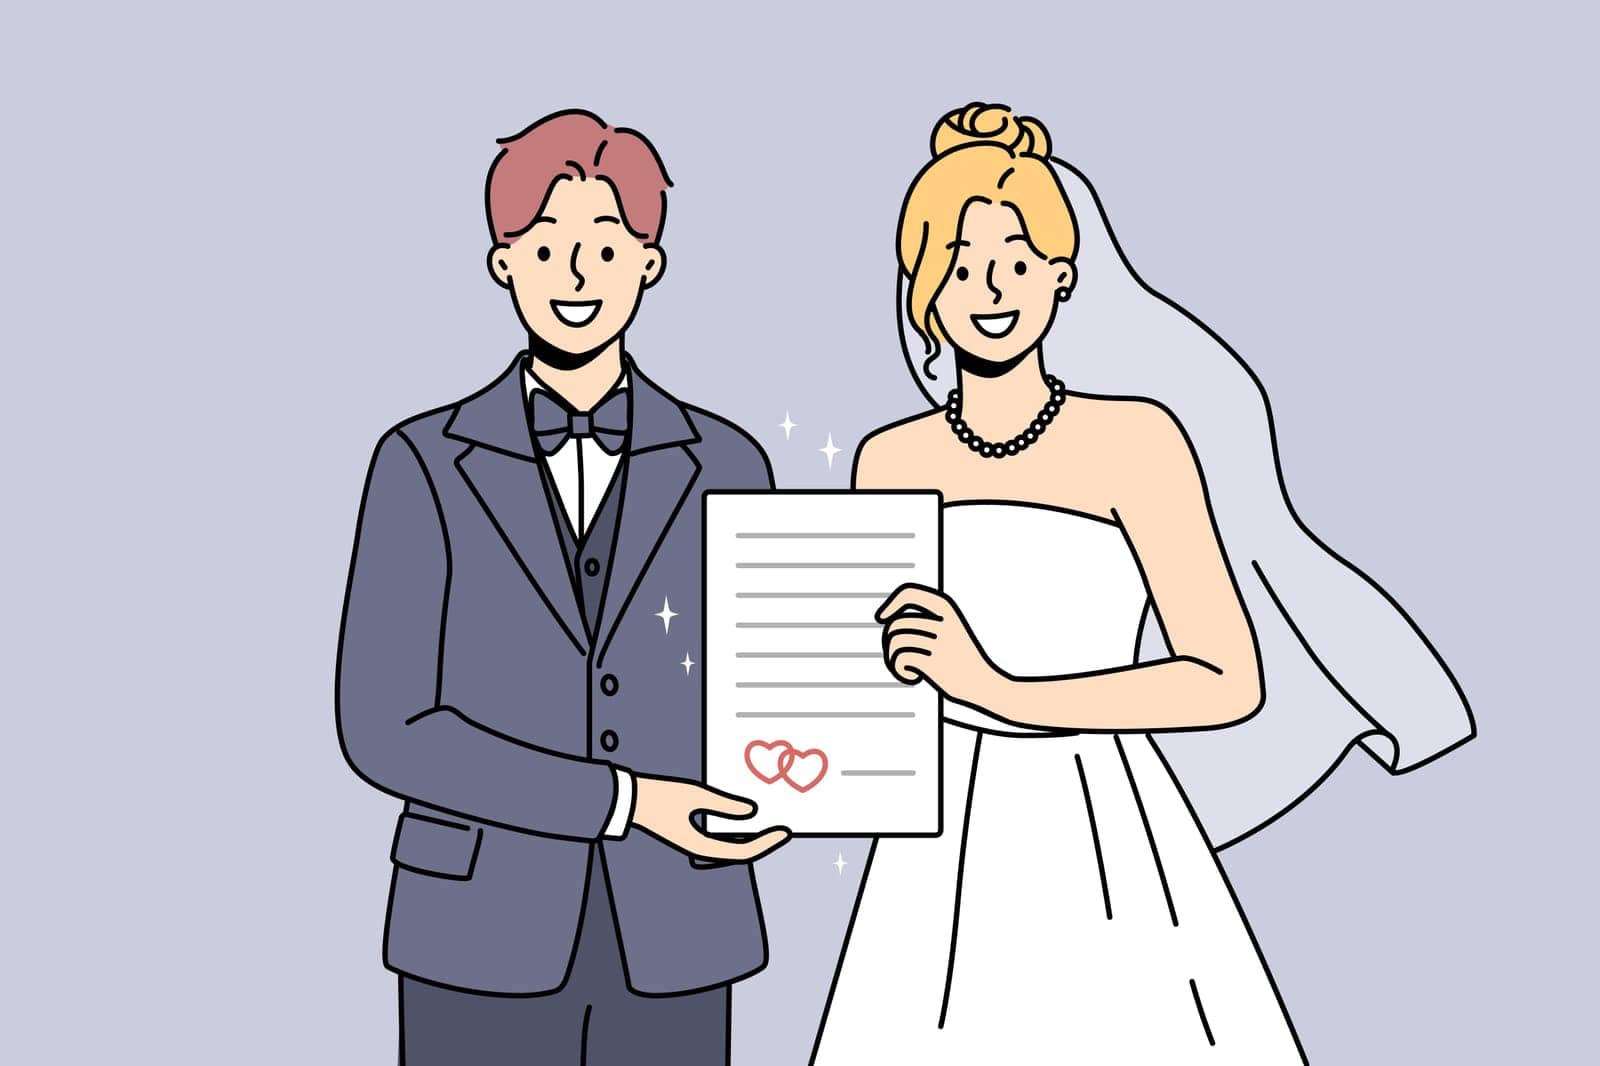 Smiling bride and groom holding marriage certificate excited about starting family. Happy couple in bridal dress and suit on wedding day. Vector illustration.